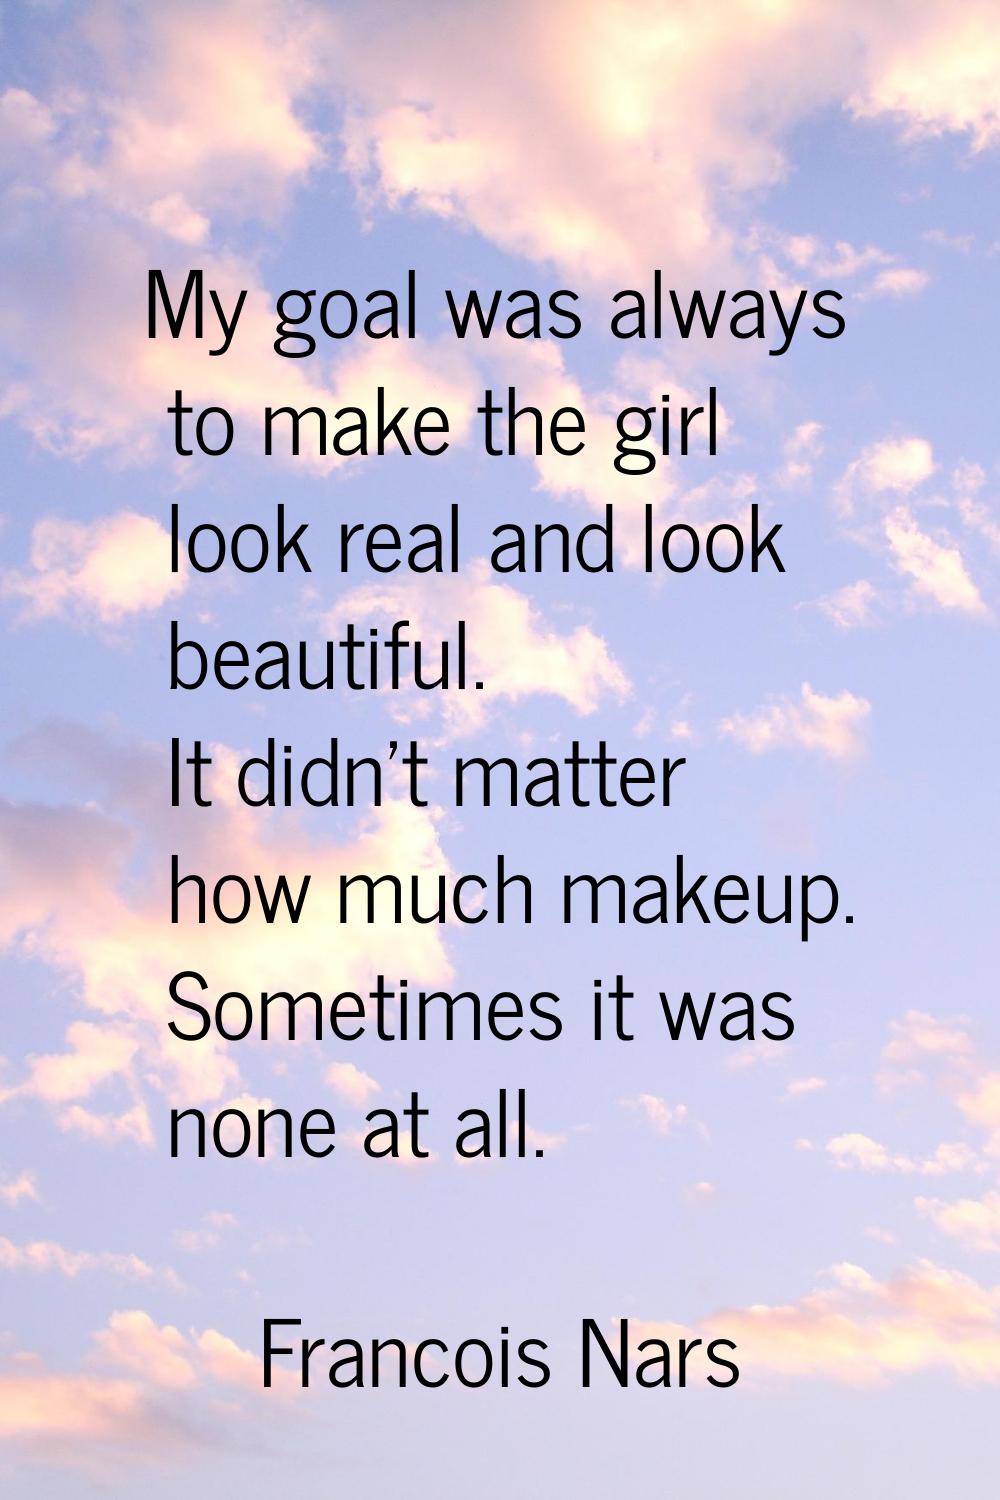 My goal was always to make the girl look real and look beautiful. It didn't matter how much makeup.